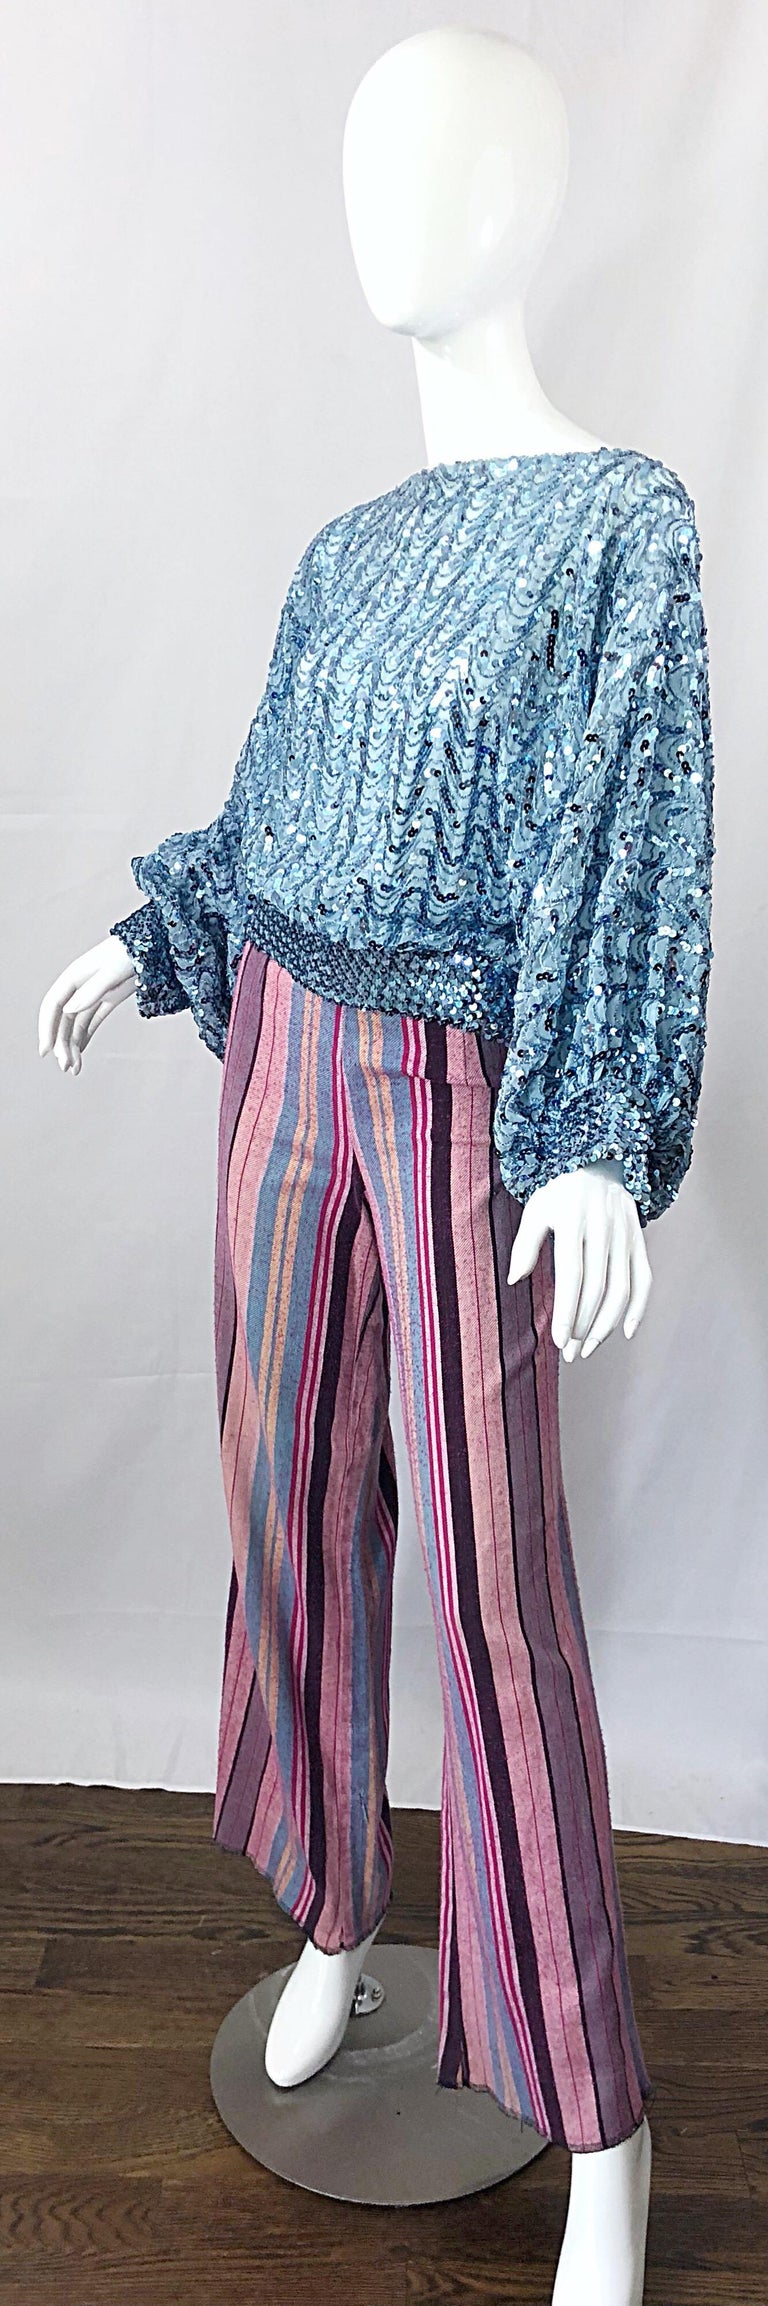 Fabulous 1970s High Waisted Pink + Blue Striped Vintage 70s Bell Bottoms Pants For Sale 6